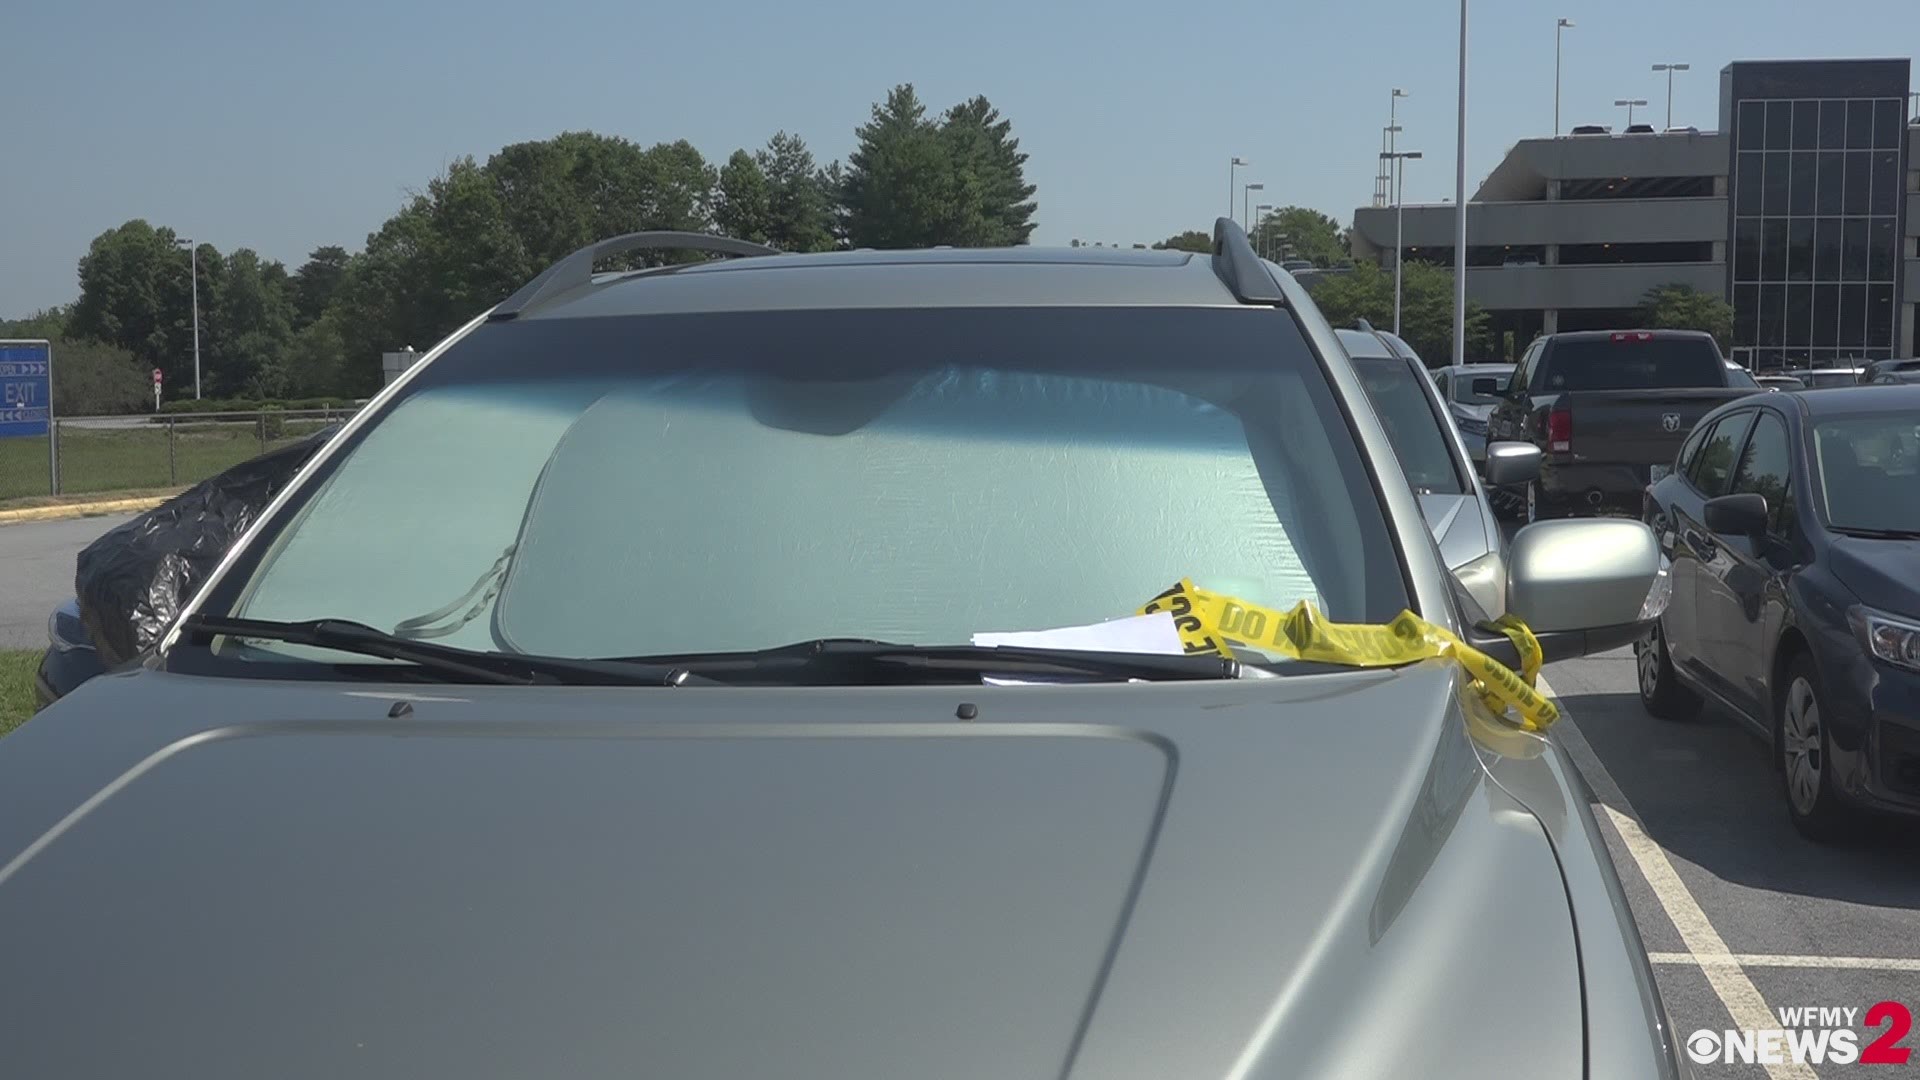 More than 20 cars were vandalized at Piedmont Triad International Airport in Greensboro recently.